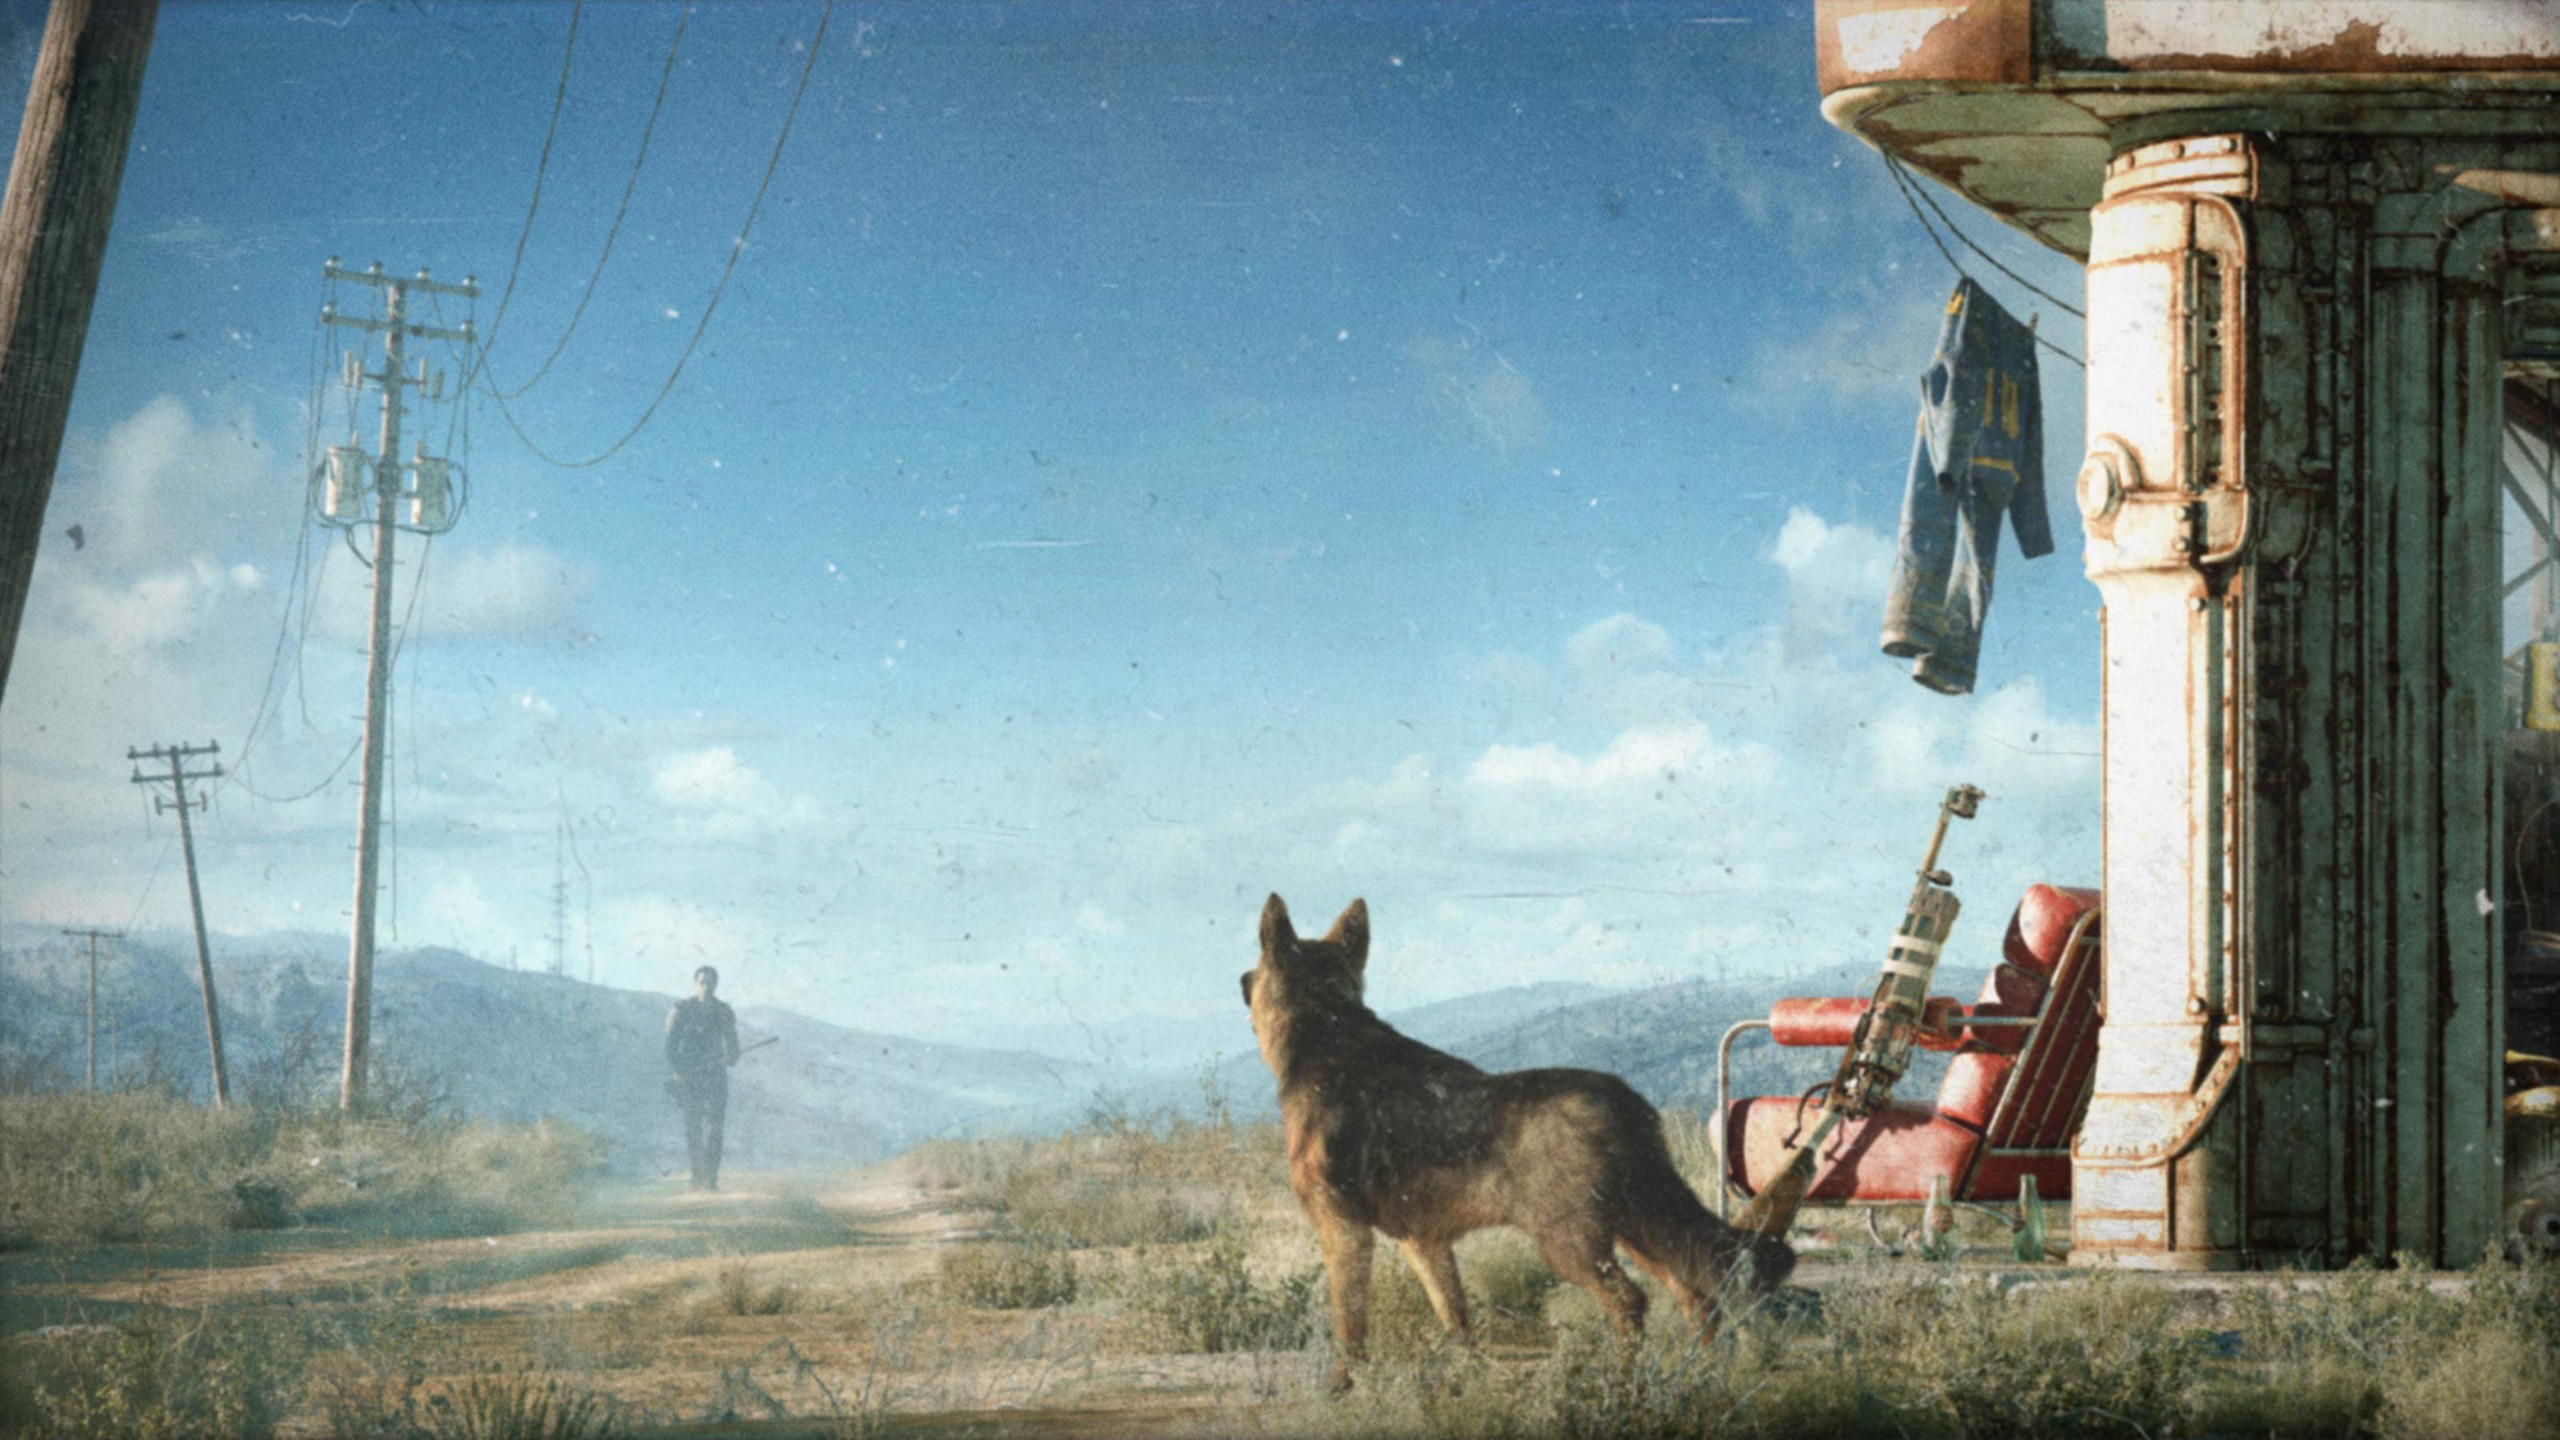 General 2560x1440 Fallout video games Fallout 4 Dogmeat PC gaming dog video game art